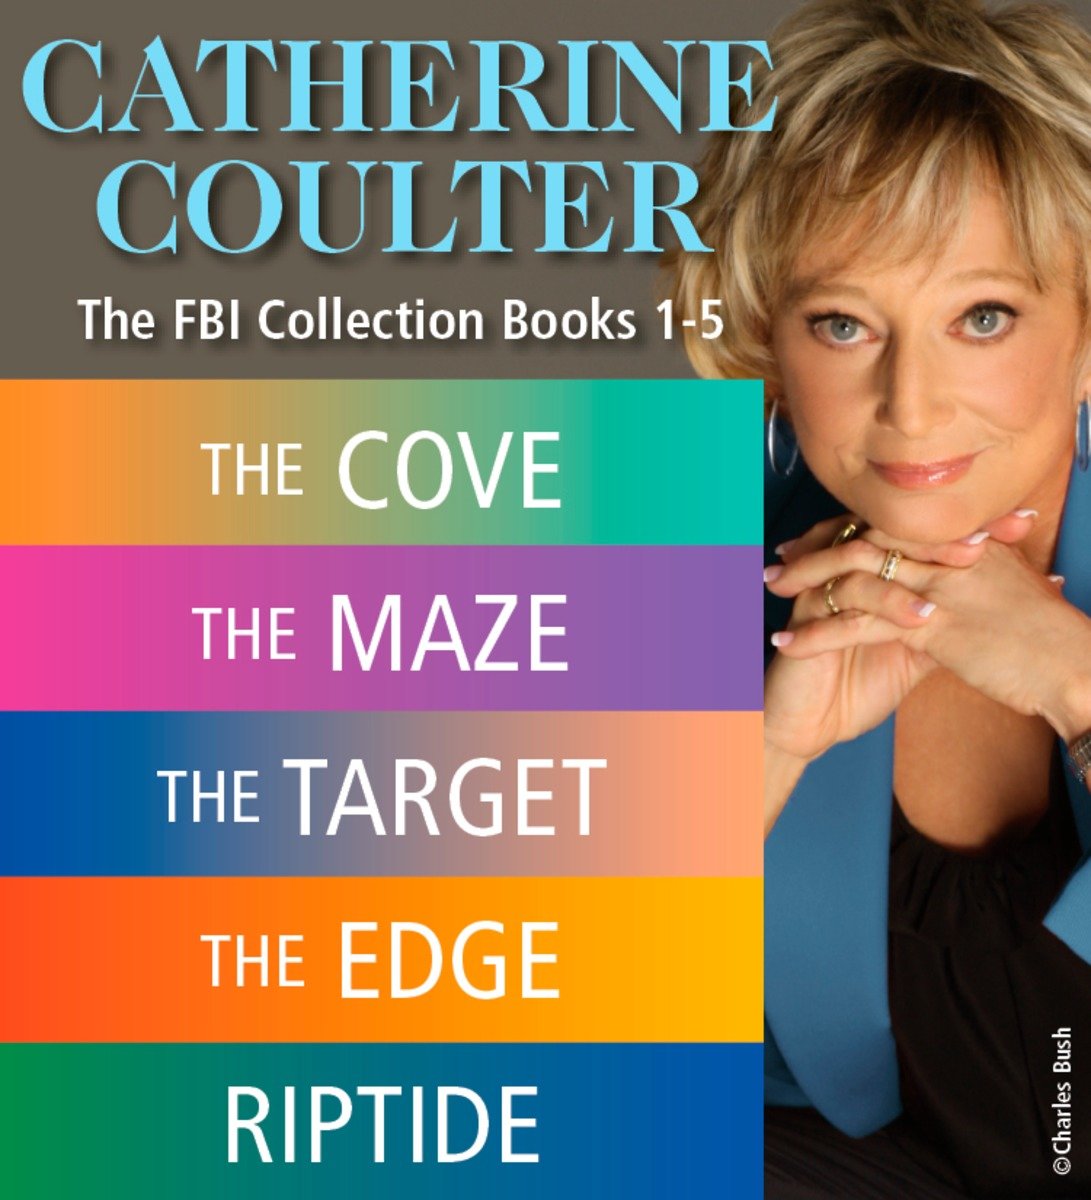 Imagen de portada para Catherine Coulter THE FBI THRILLERS COLLECTION Books 1-5 [electronic resource] :